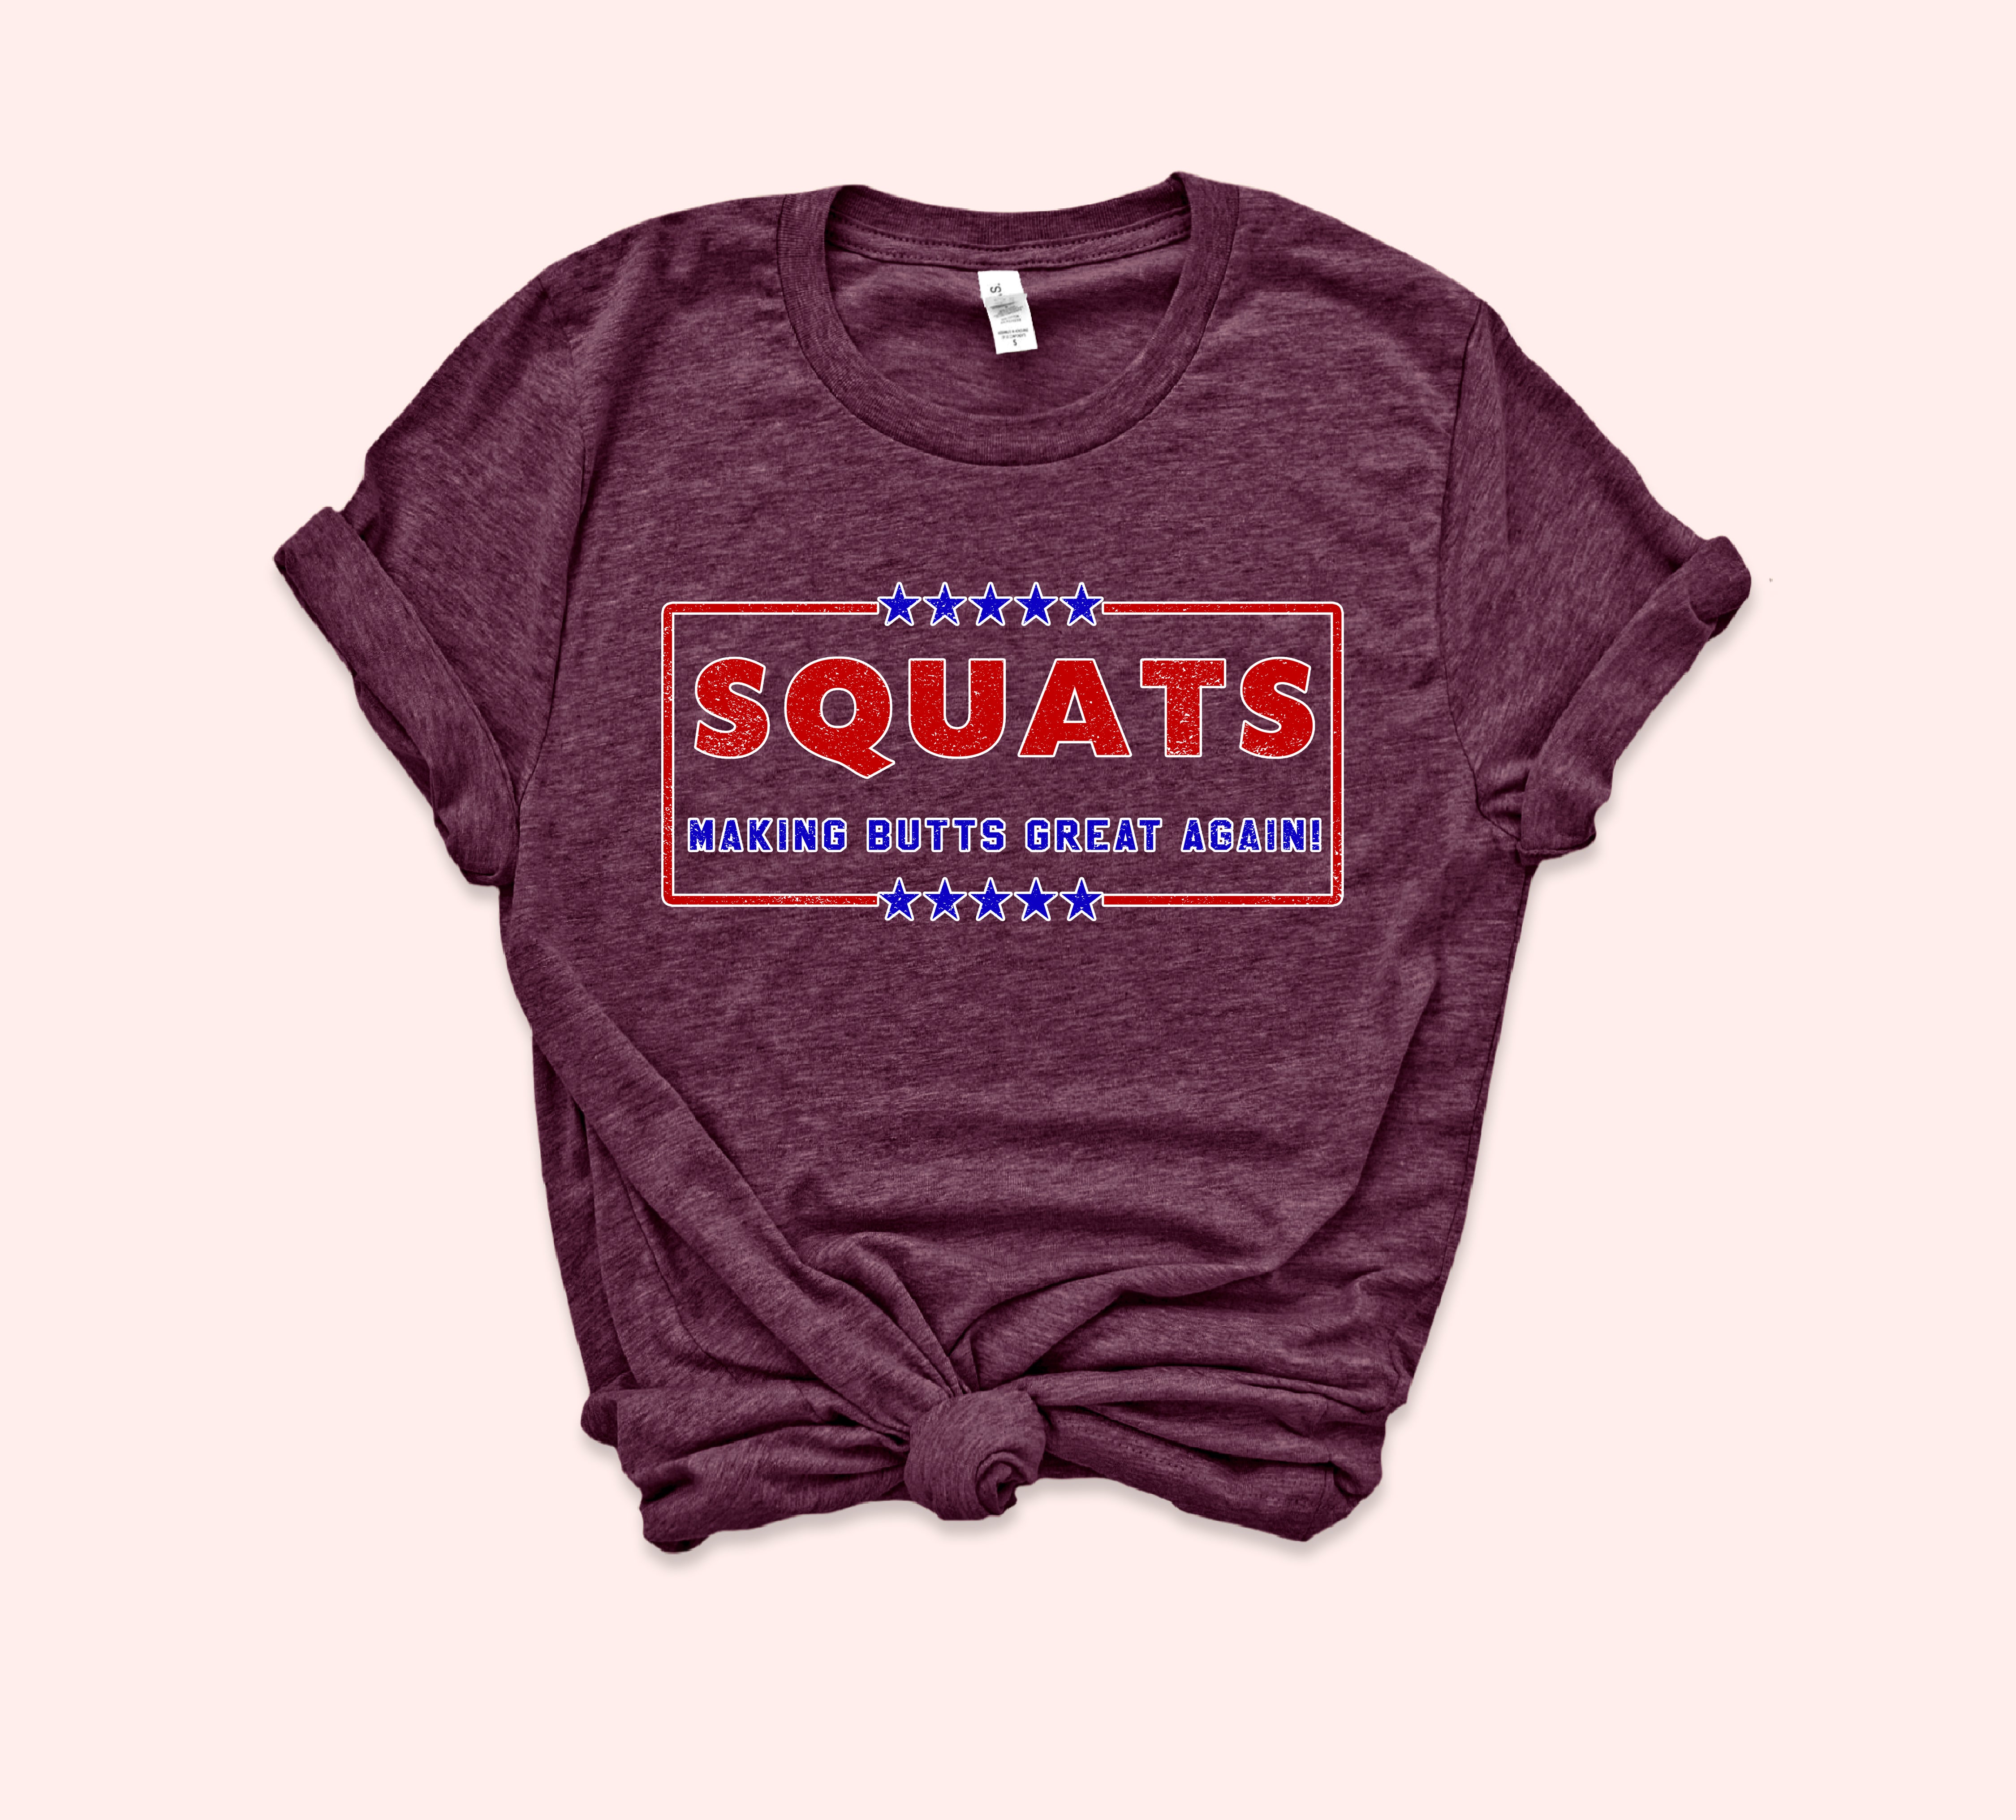 Heather maroon shirt that says squats making butts great again - HighCiti